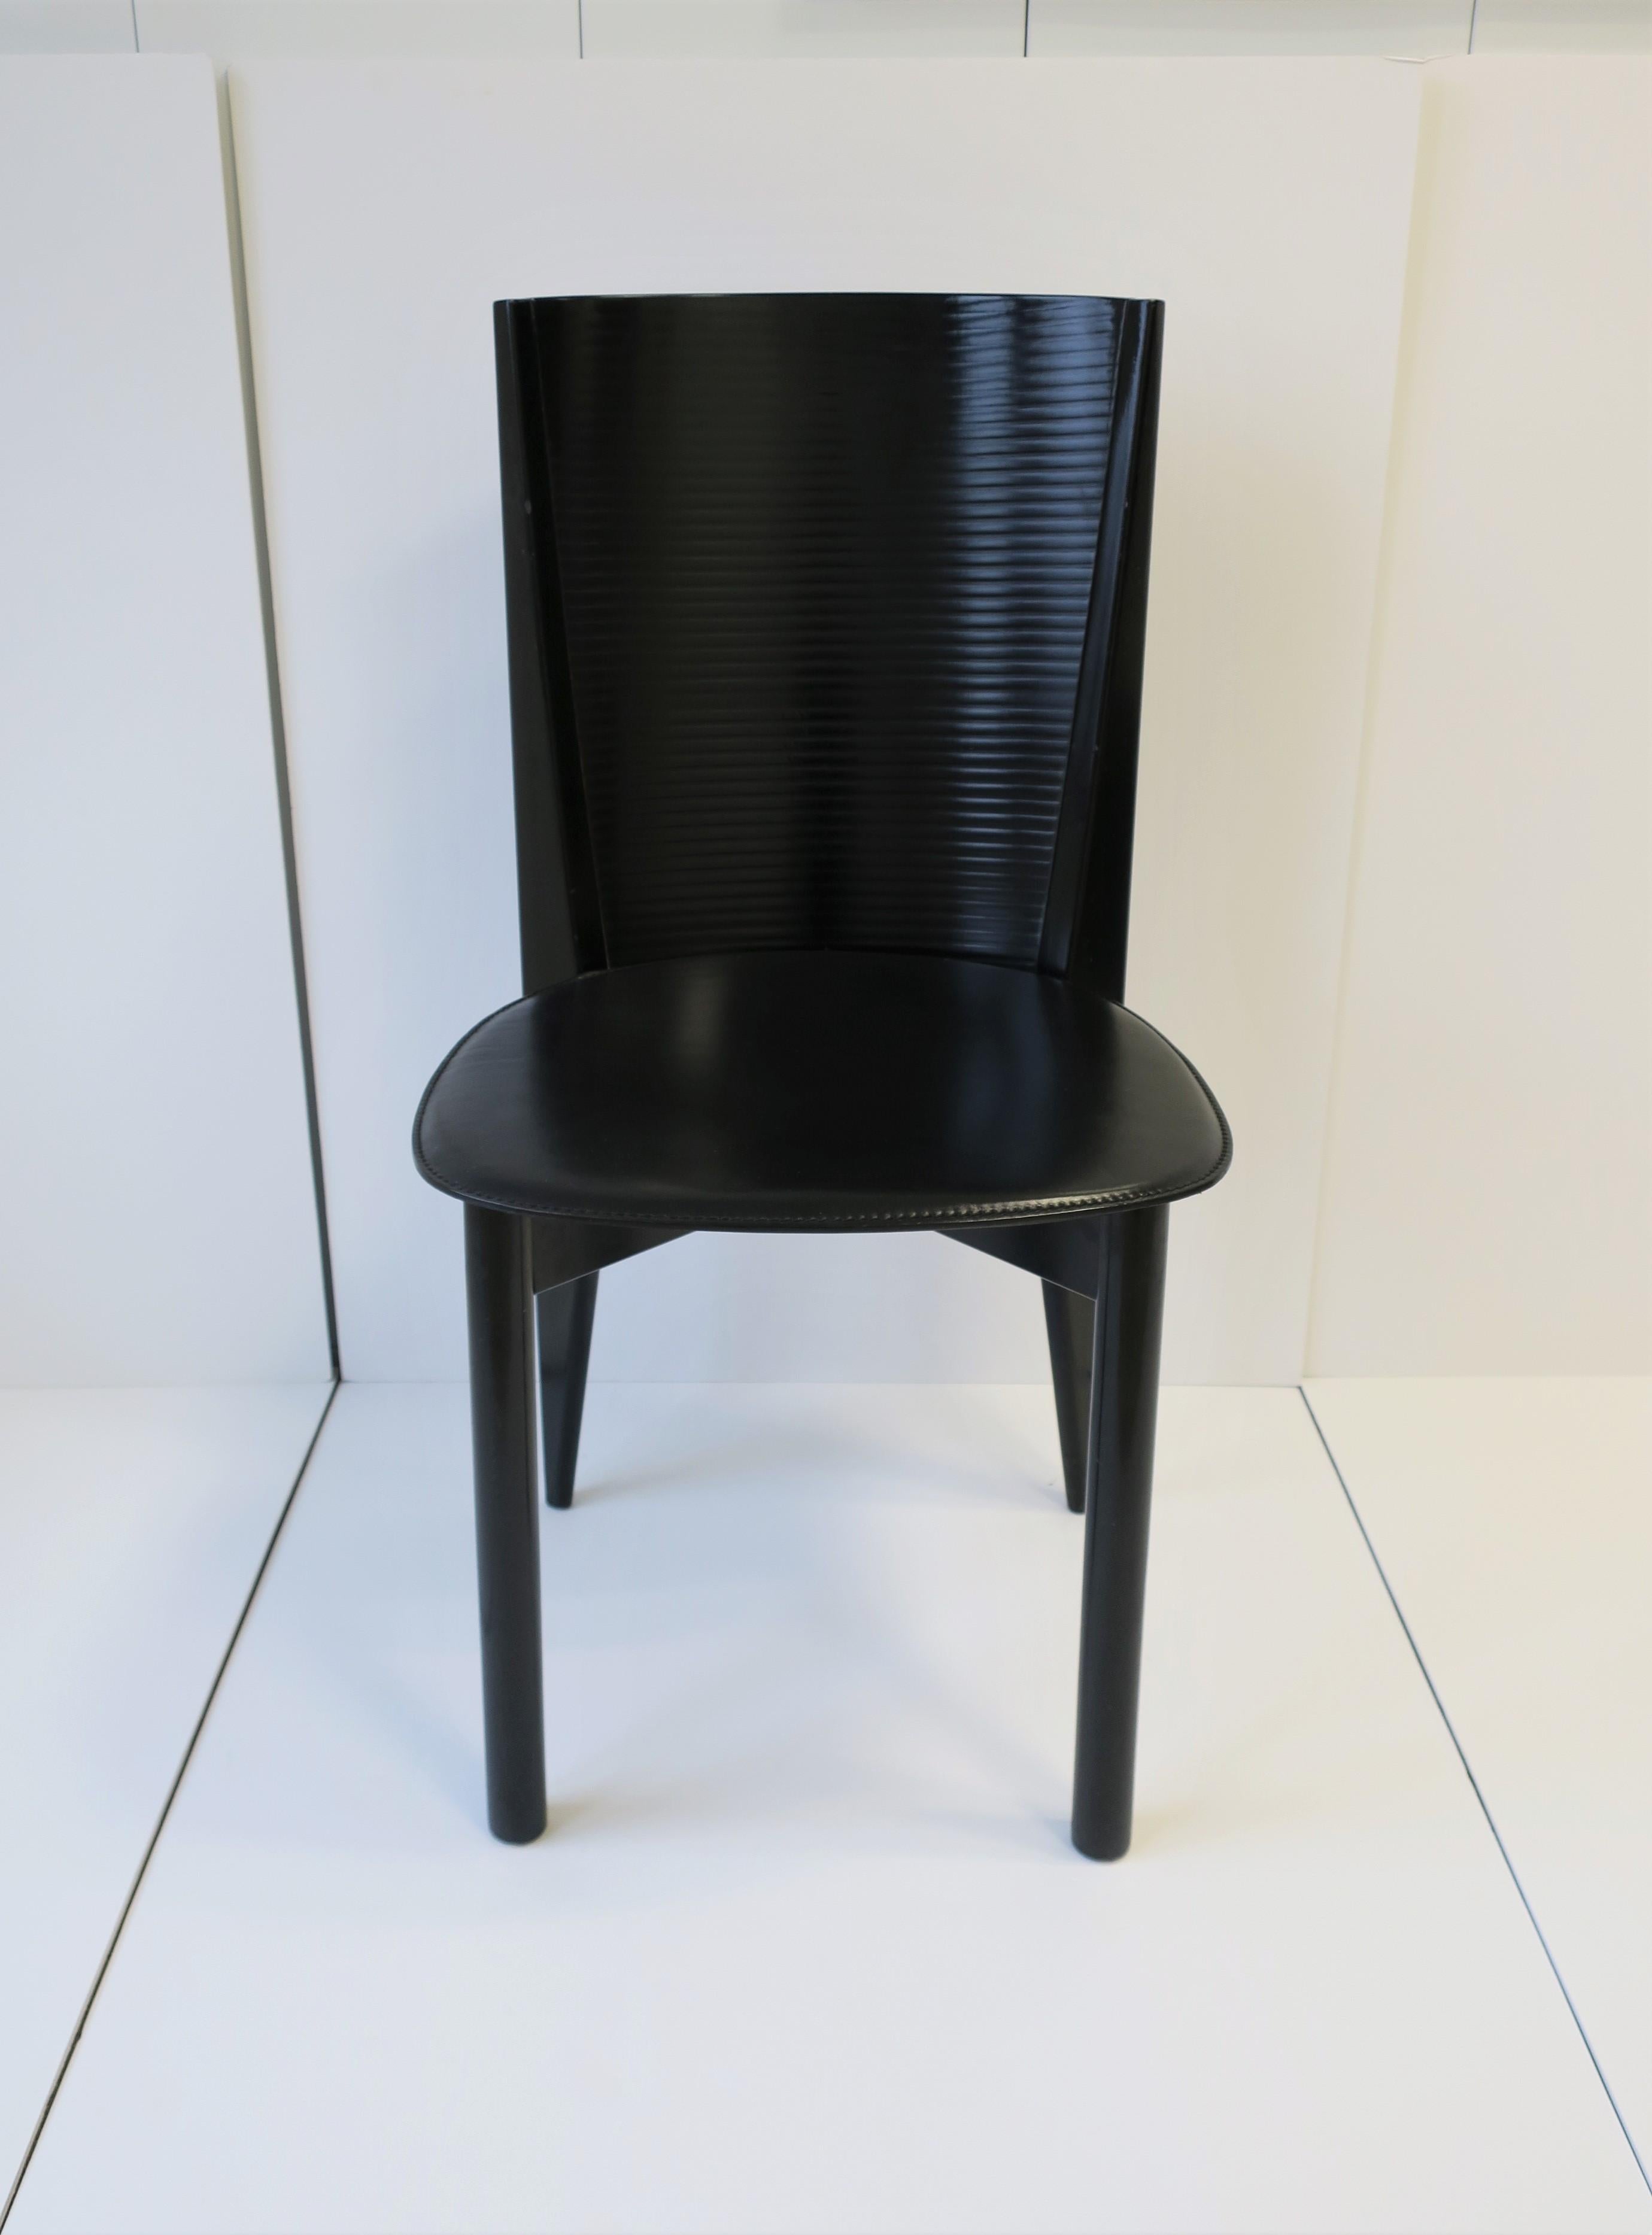 lacquer chairs